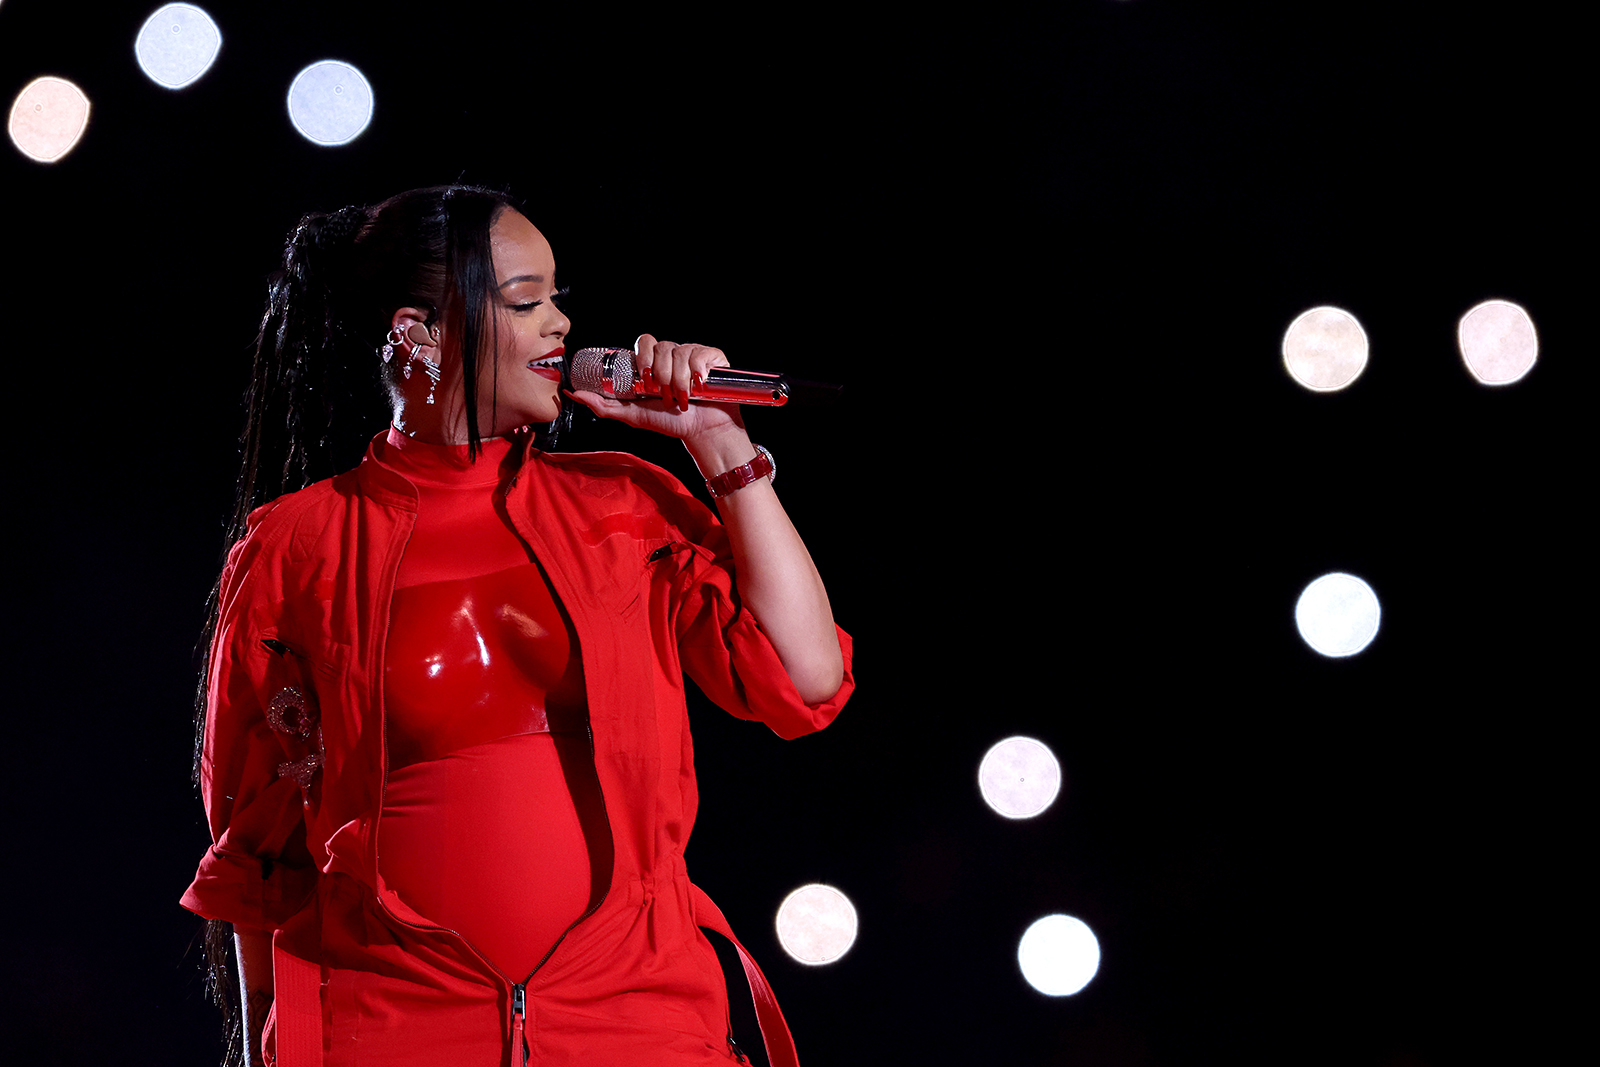 Rihanna performs during the Super Bowl halftime show on February 12. 